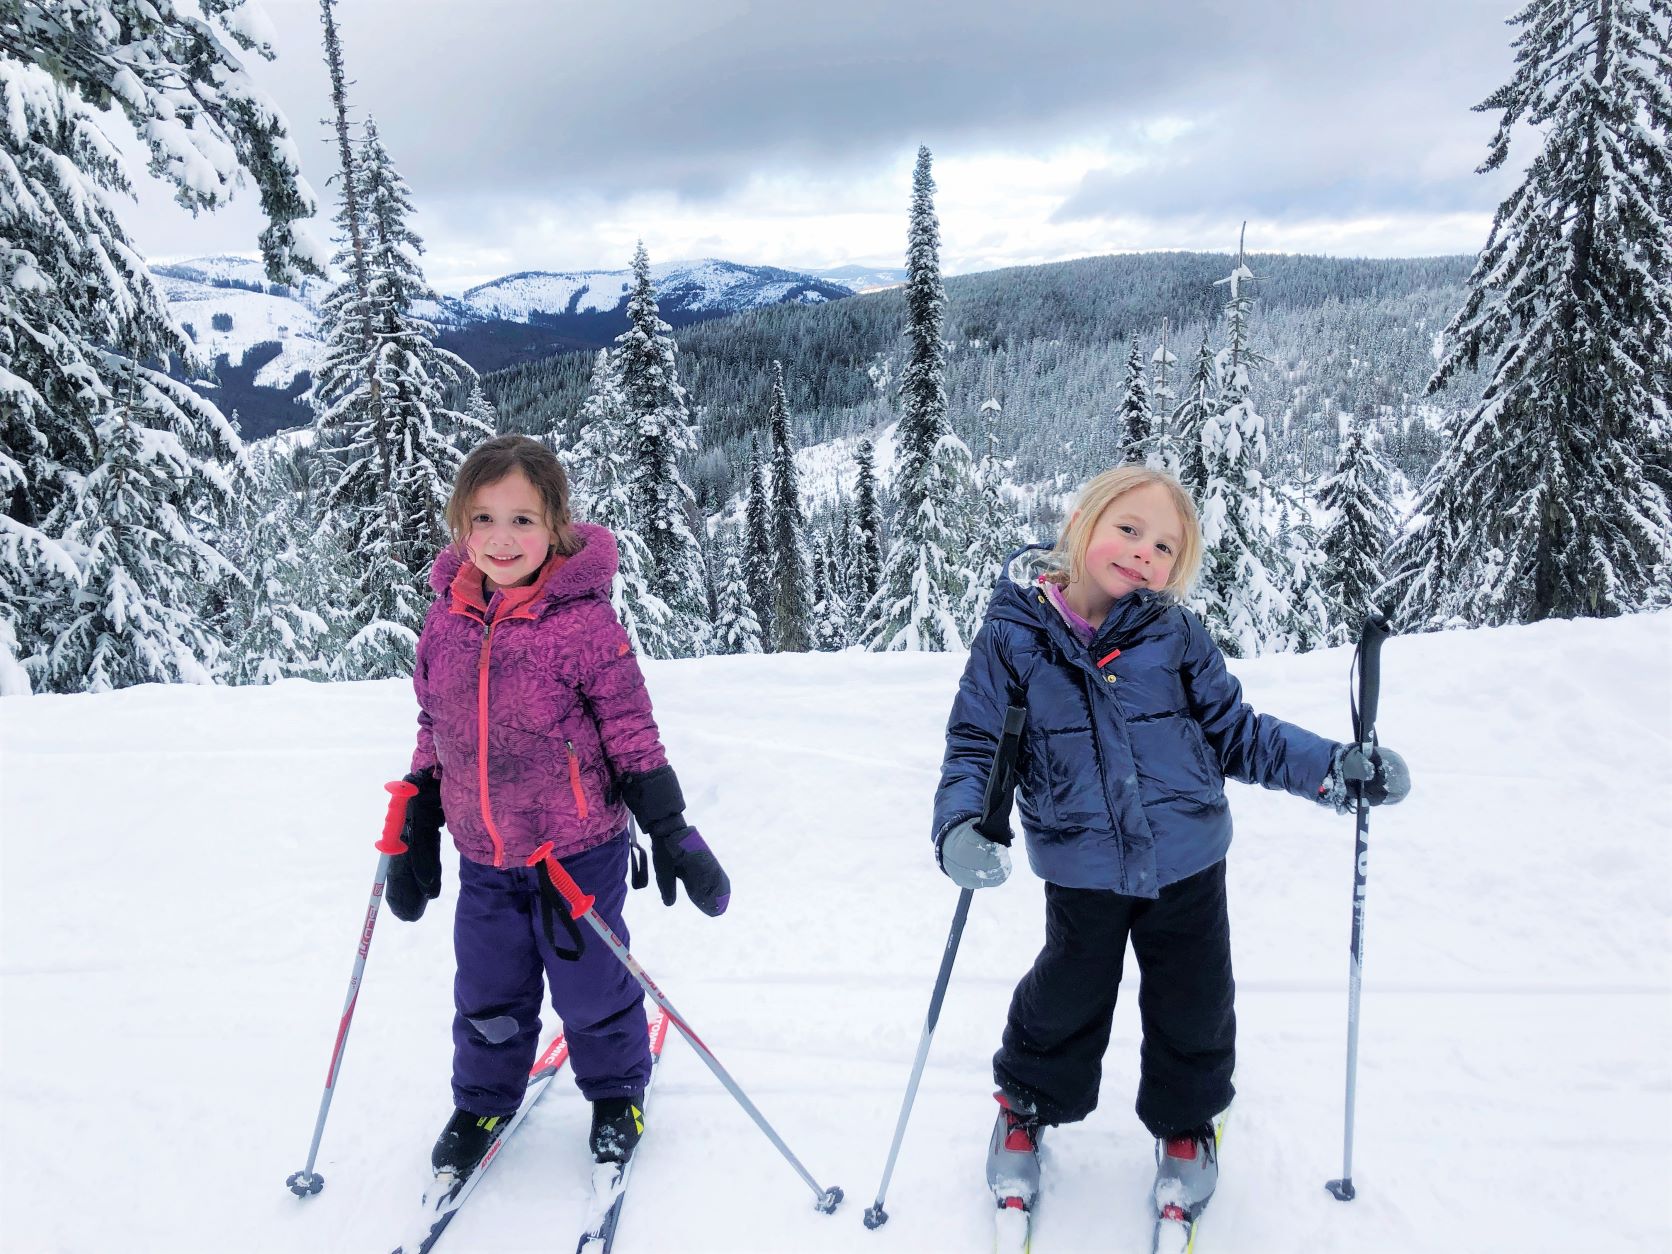 Two young girls smiling at the camera while cross-country skiing at Mt. Spokane.